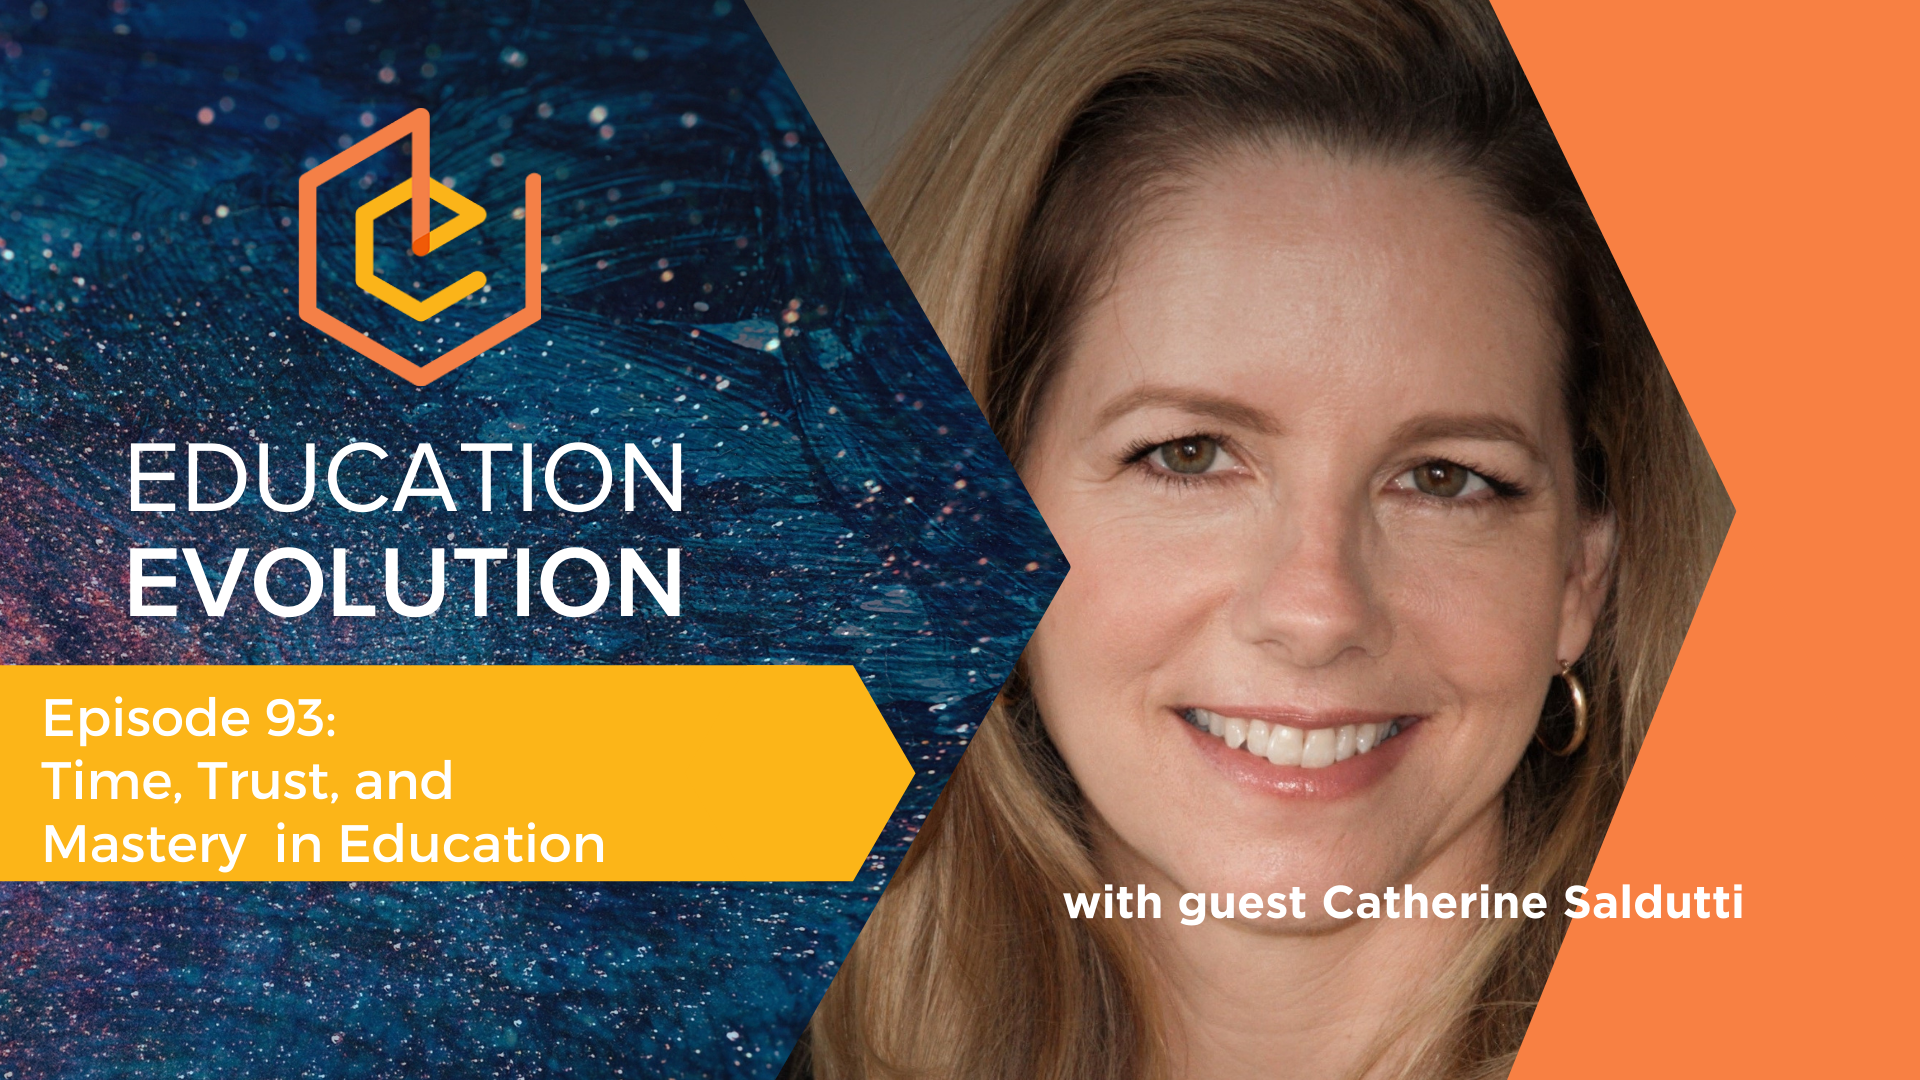 Education Evolution Podcast logo with headshot of Catherine Saldutti, presenting Time, Trust & Mastery in Education.